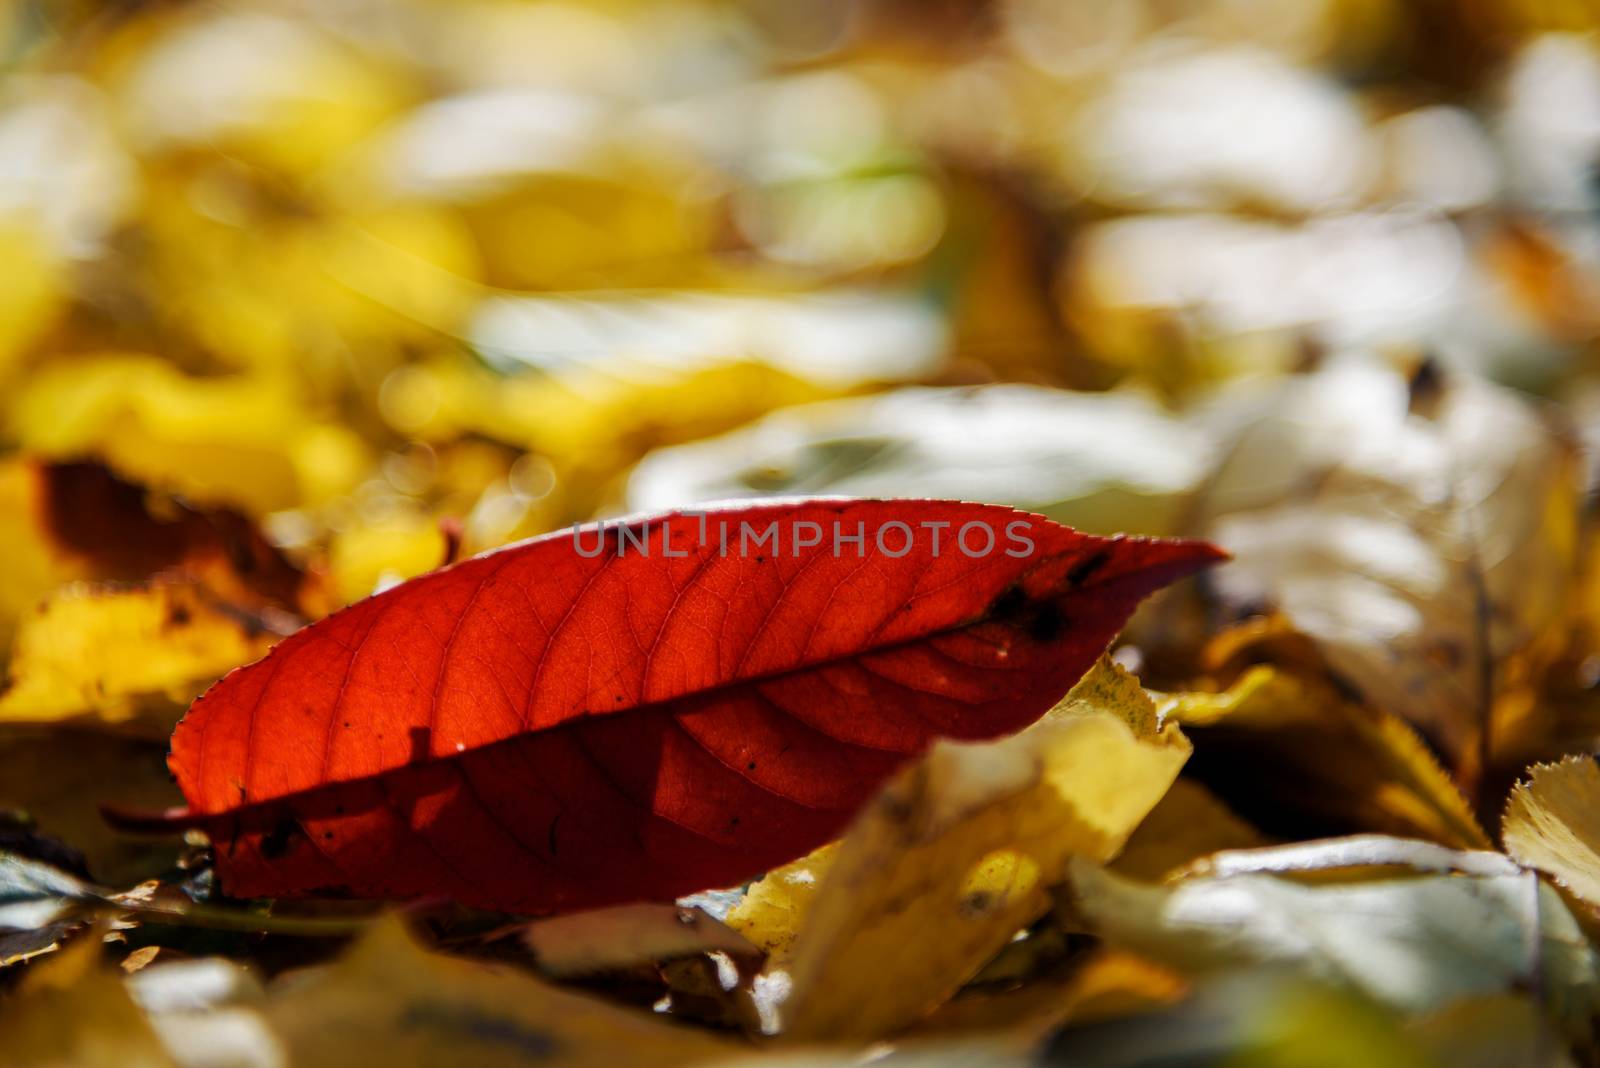 Red peach leaf on yellow autumn background by WolfWilhelm